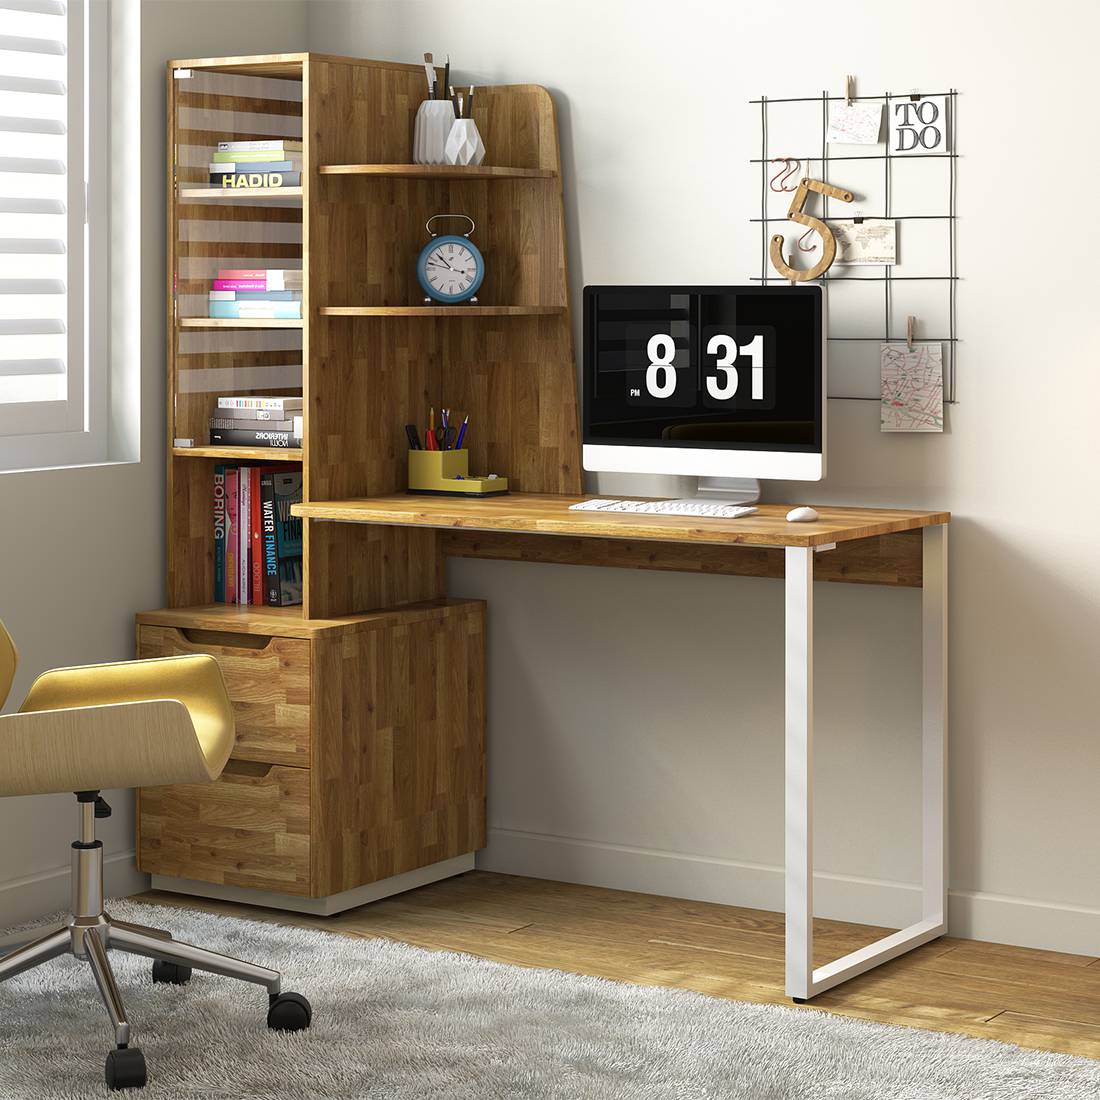 Study Table Buy Study Table Online At Best Prices 2020 Study